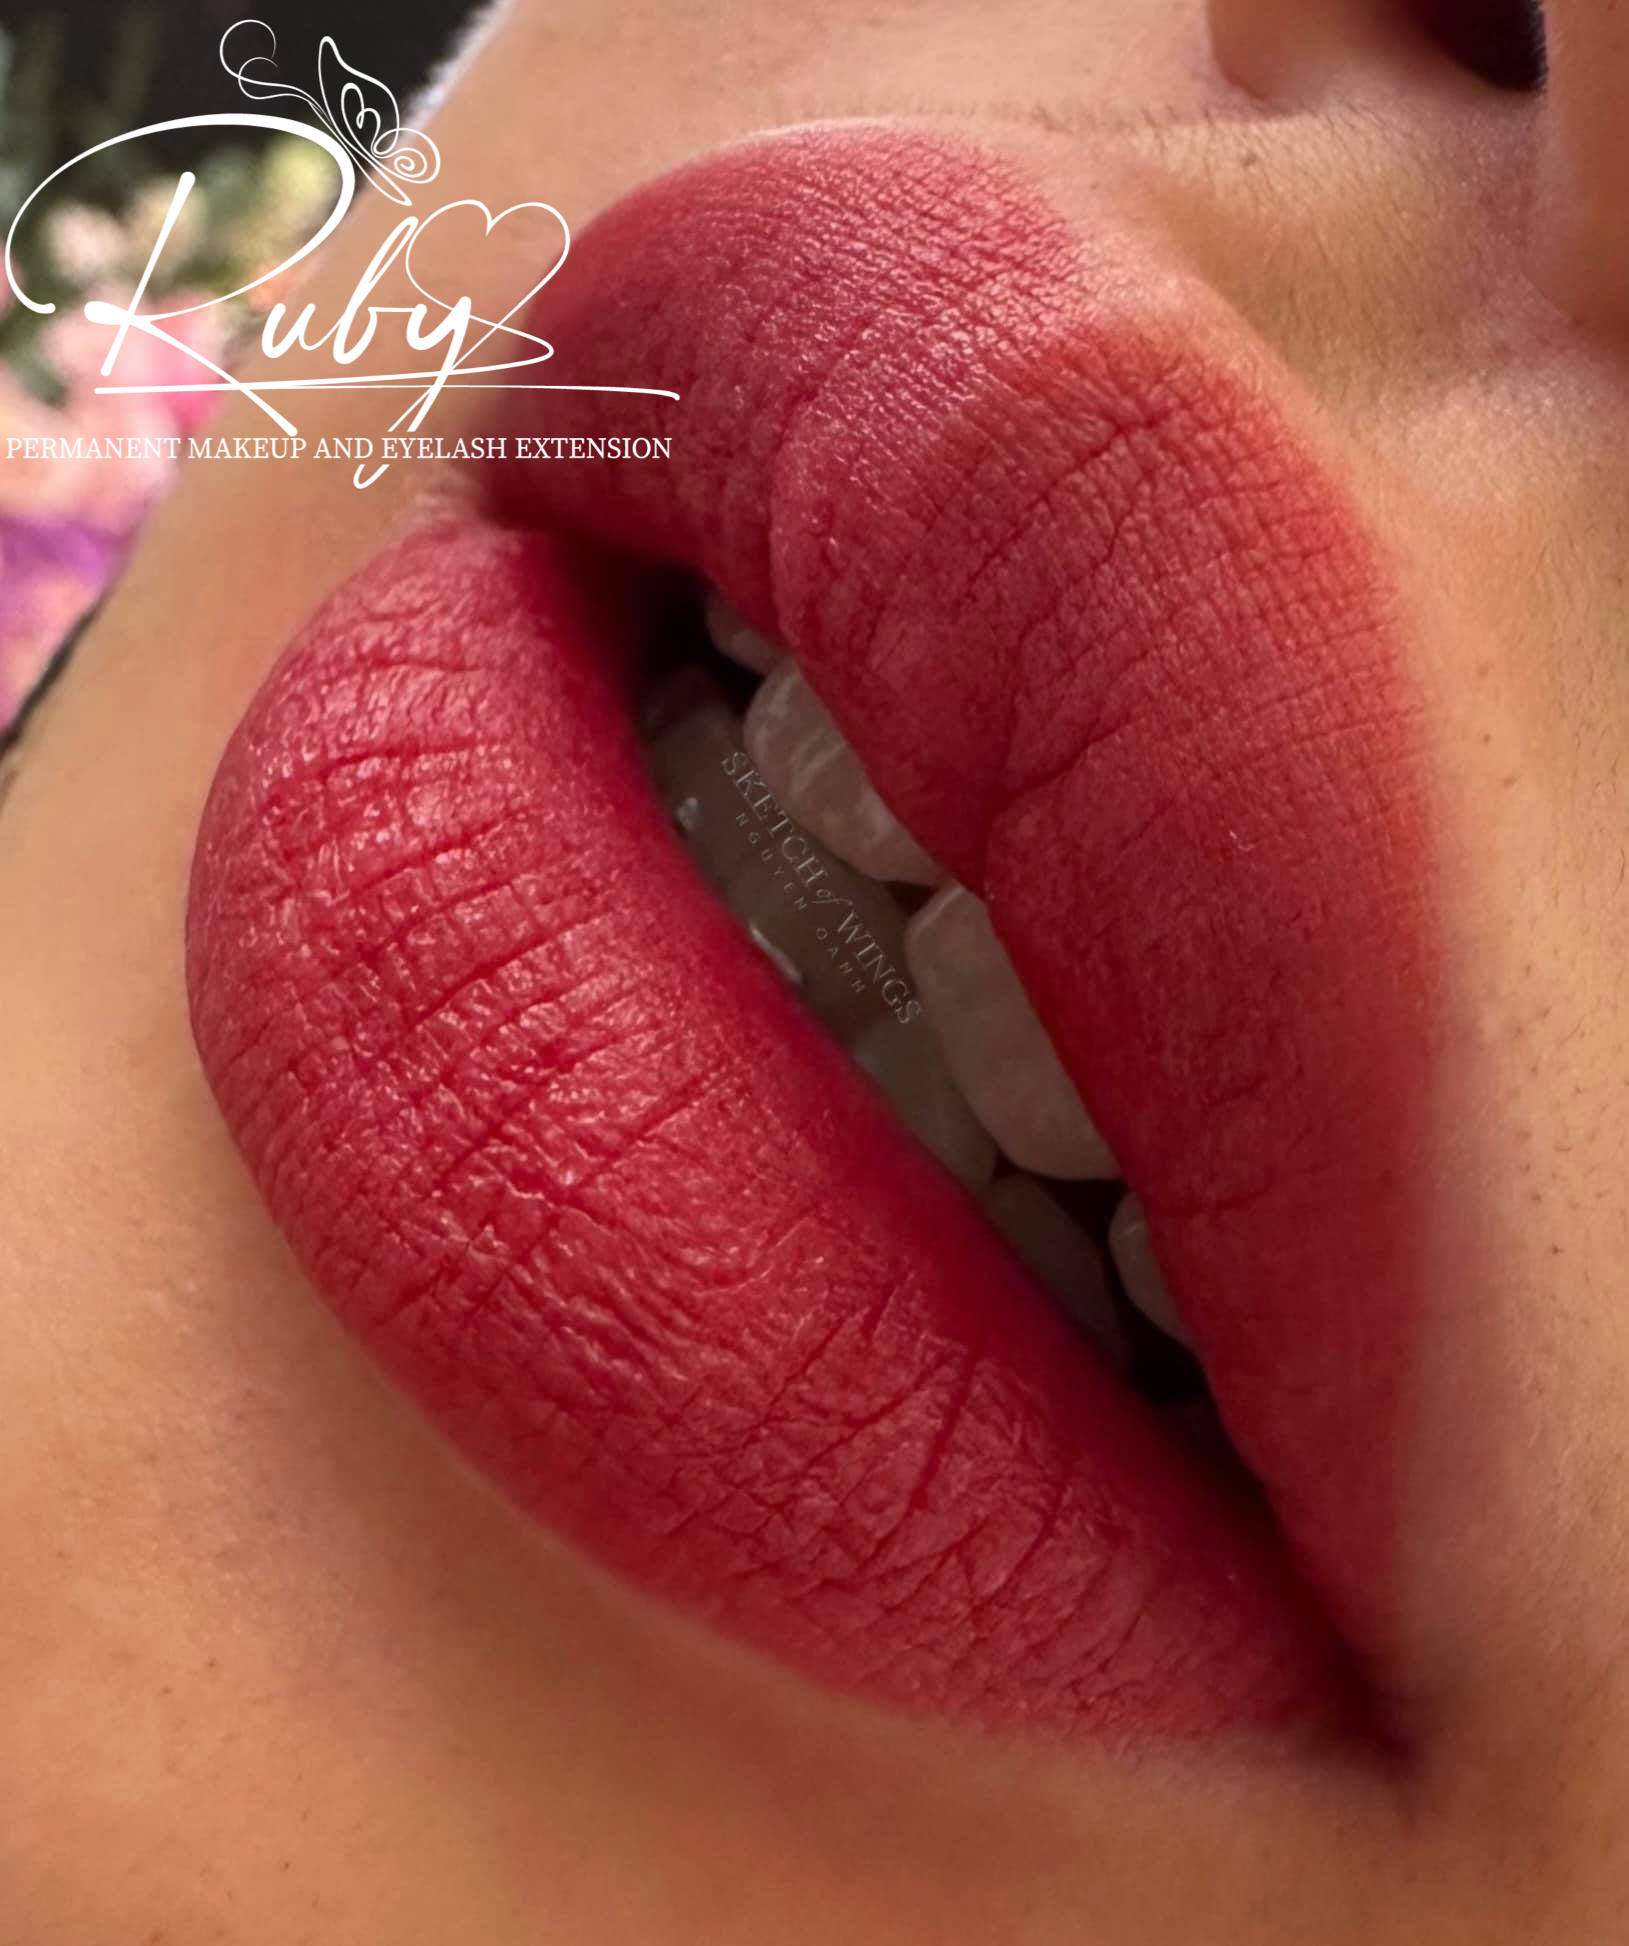 Ruby Permanent Makeup and Eyelash Extension